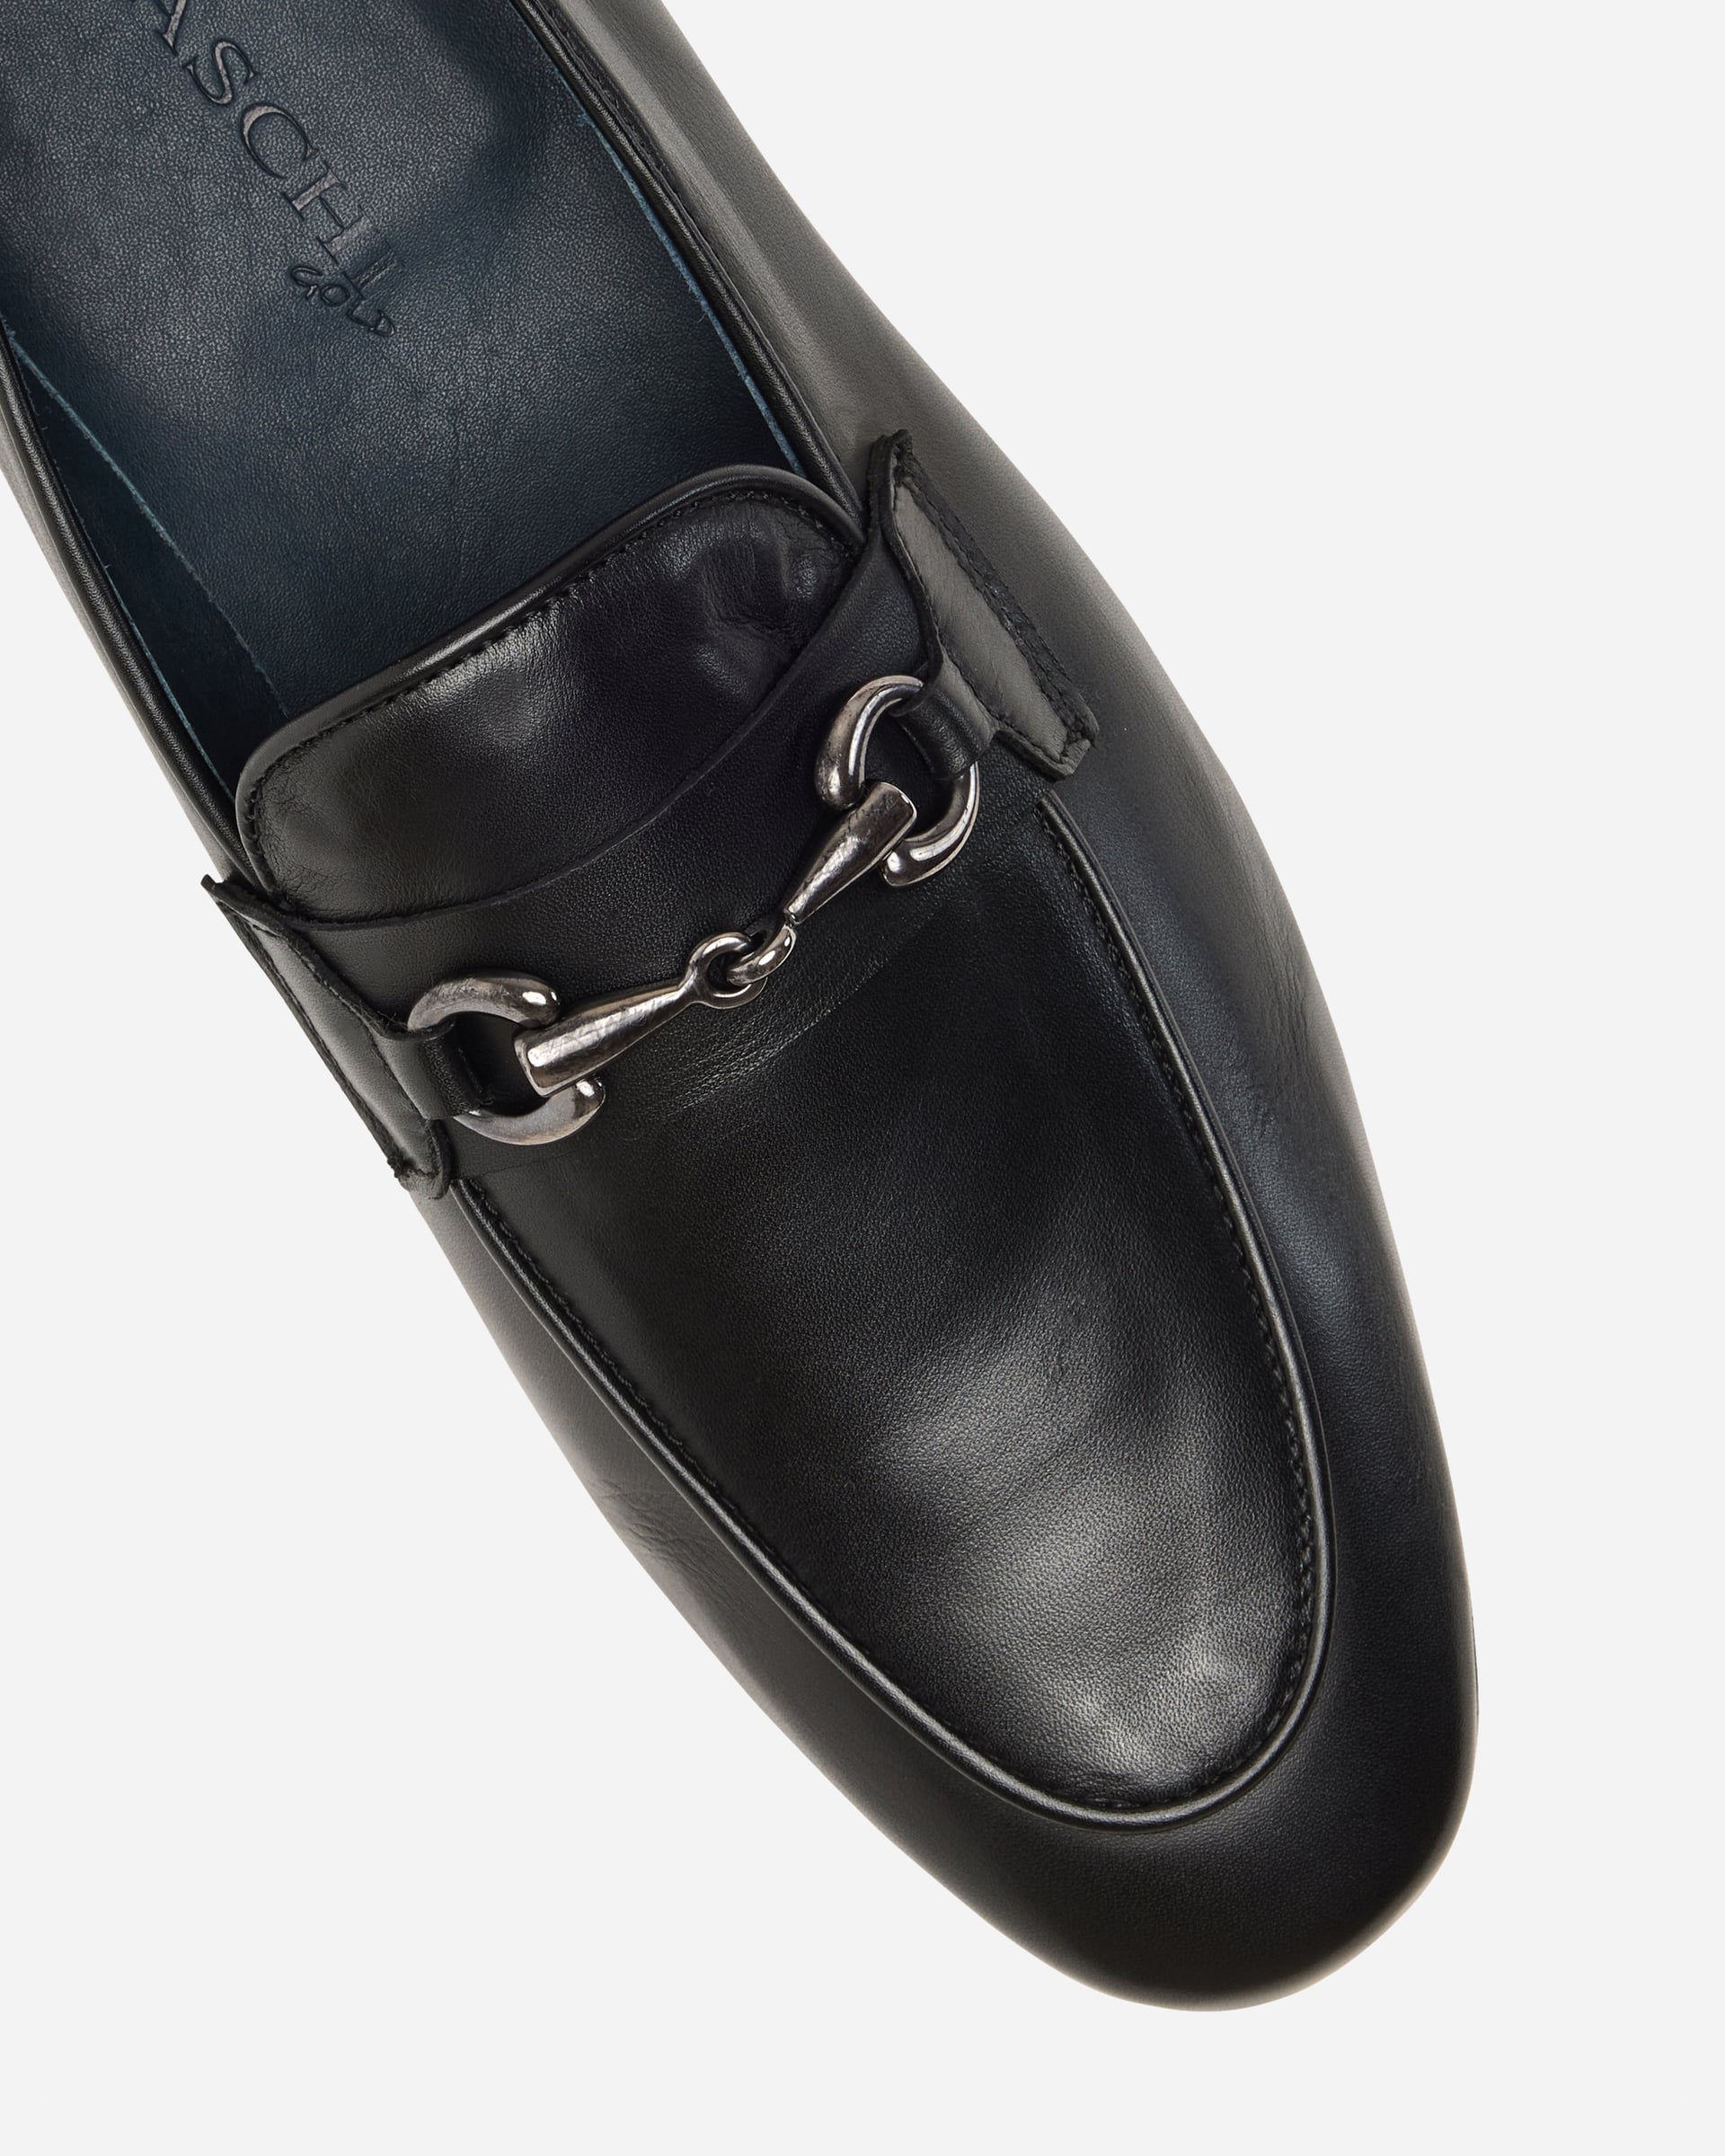 Penny Loafers - Men's Loafers at Menzclub